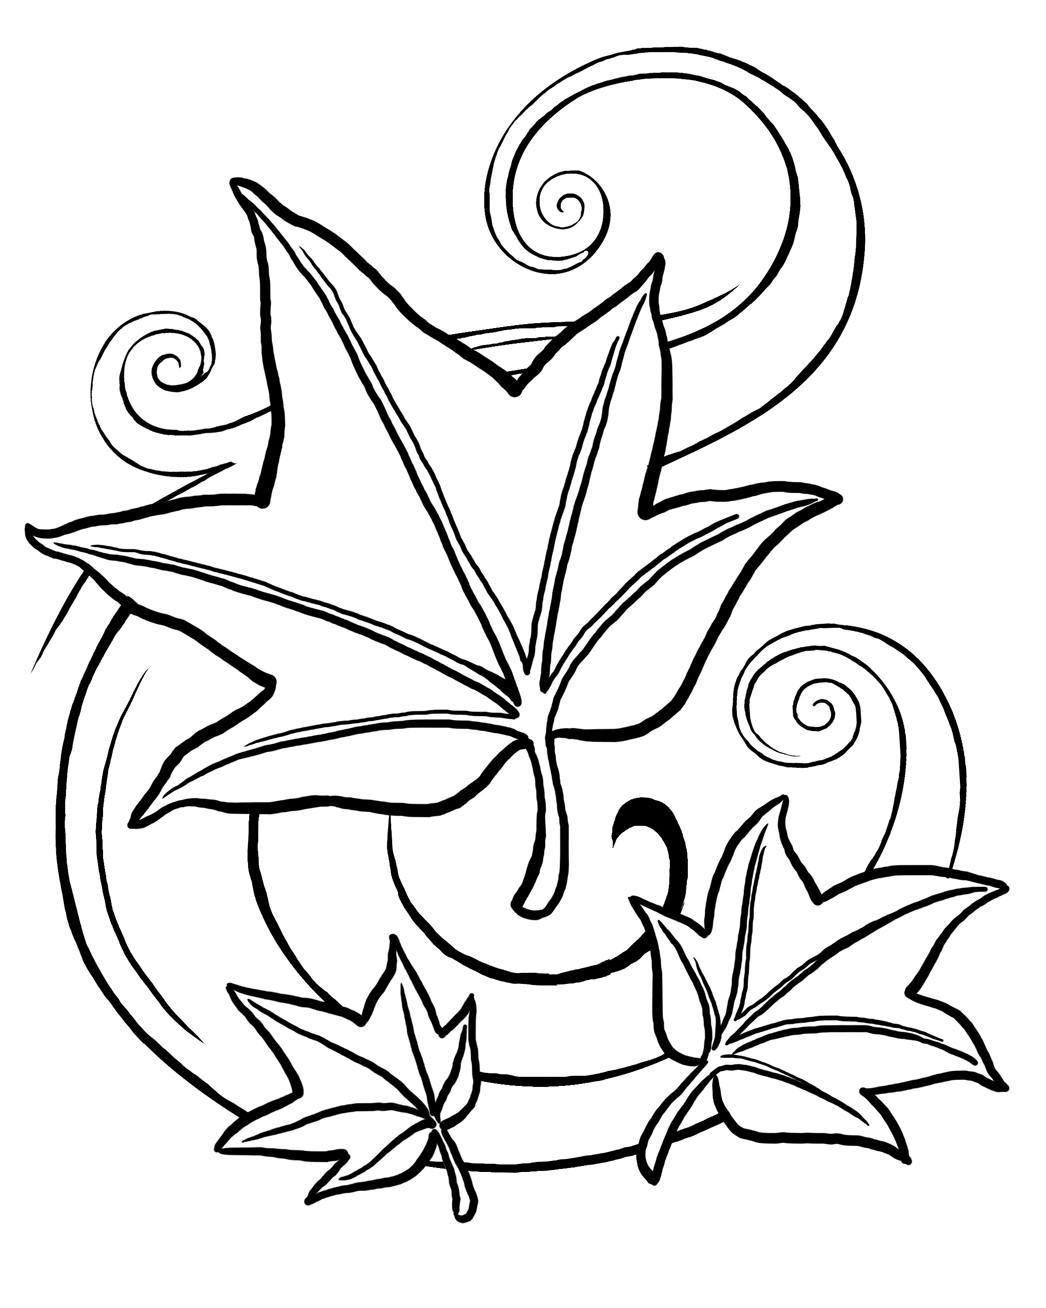 Free Coloring Pages Of Leaves Free Printable Leaf Coloring Pages For Kids 26599 Bestofcoloring